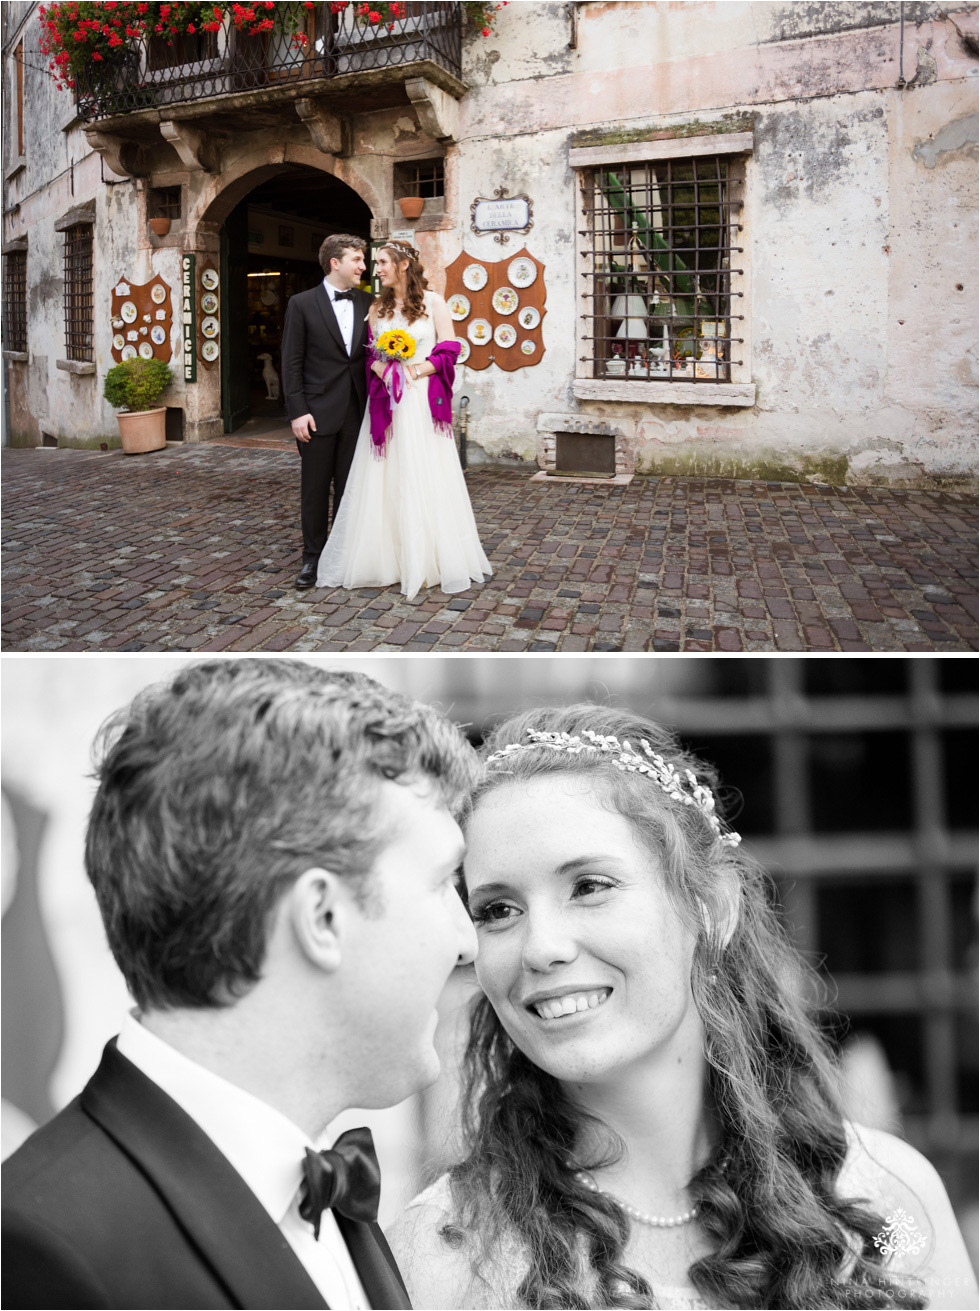 Bride and groom in the old town of Bassano del Grappa, Italy - Blog of Nina Hintringer Photography - Wedding Photography, Wedding Reportage and Destination Weddings